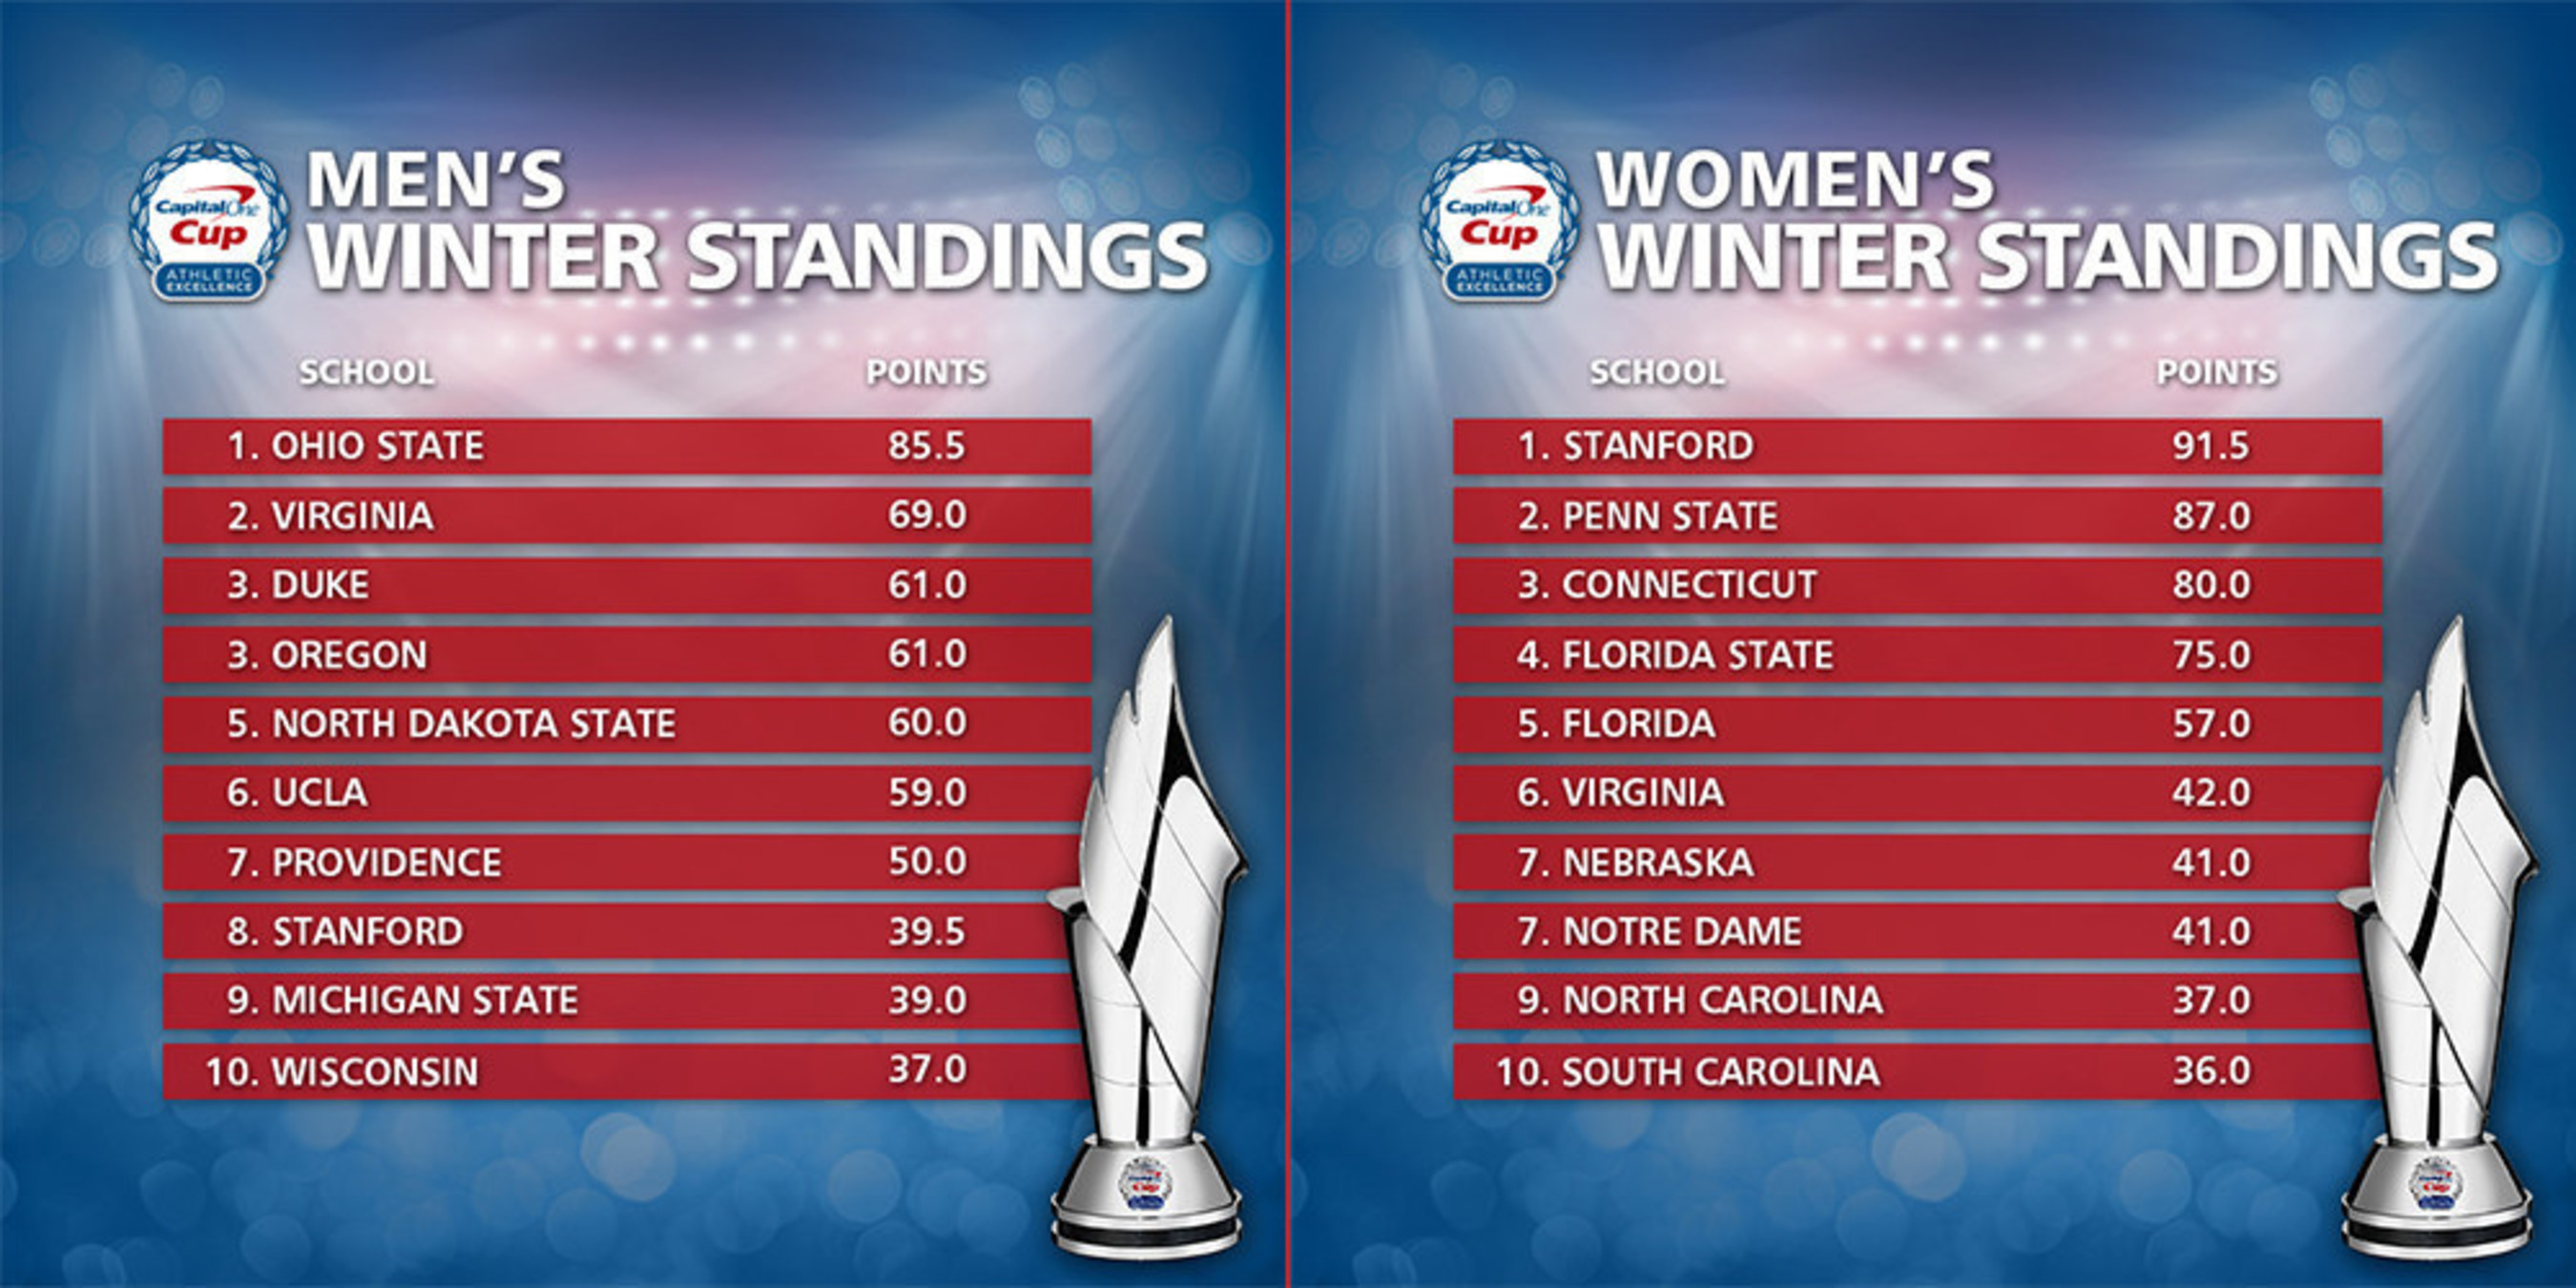 Buckeyes take sole position atop the men's standings for first time following a thrilling winter sports season, while the Cardinal stand tall in the women's standings